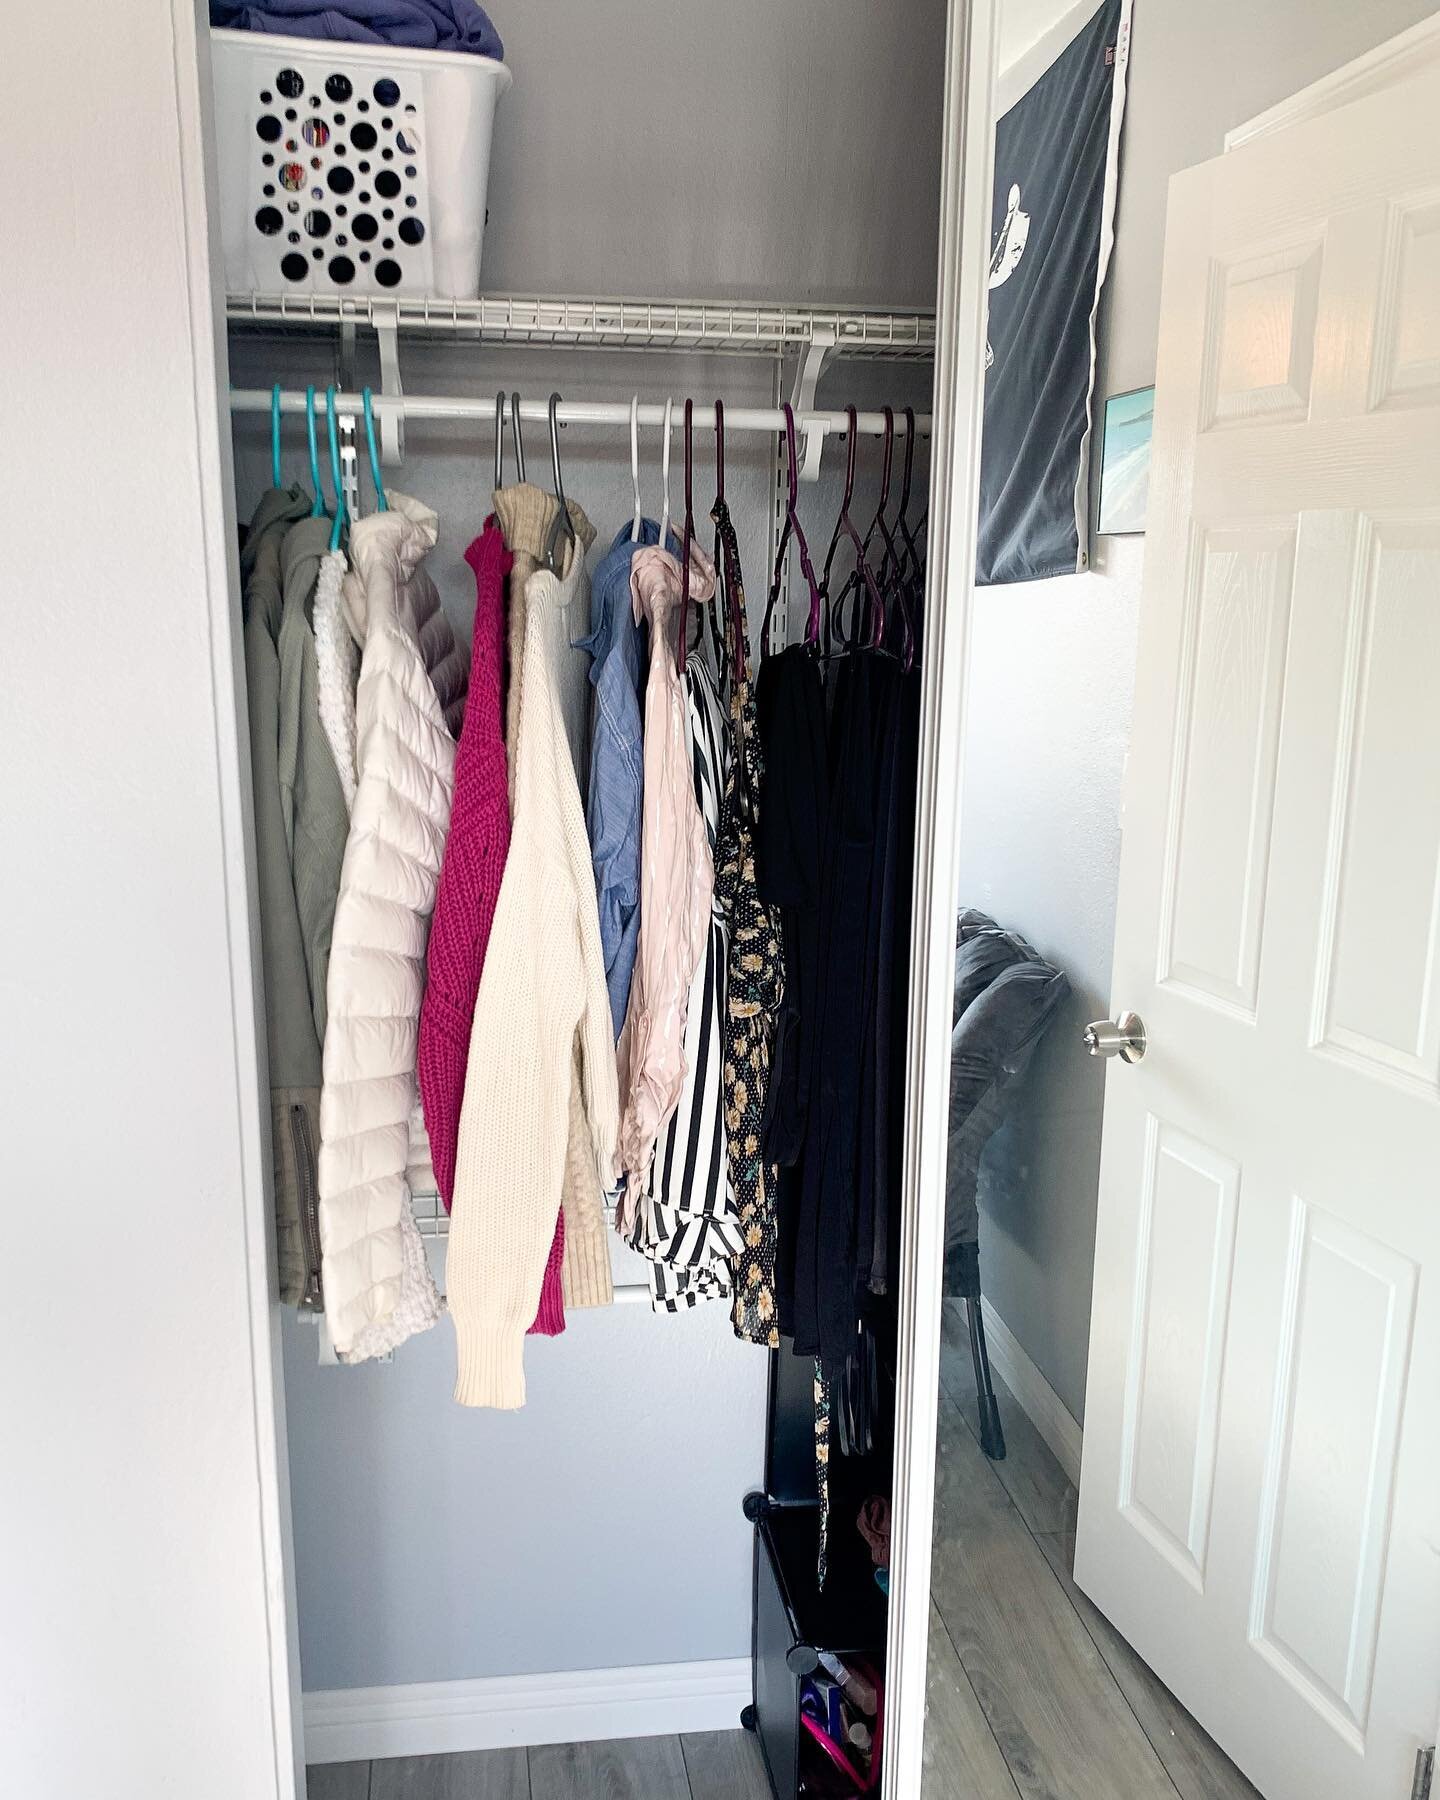 Closet Before and After shots. After doing all the sorting, the client was able to hone in on her current style to easily pick out outfits for all the events in her busy life.